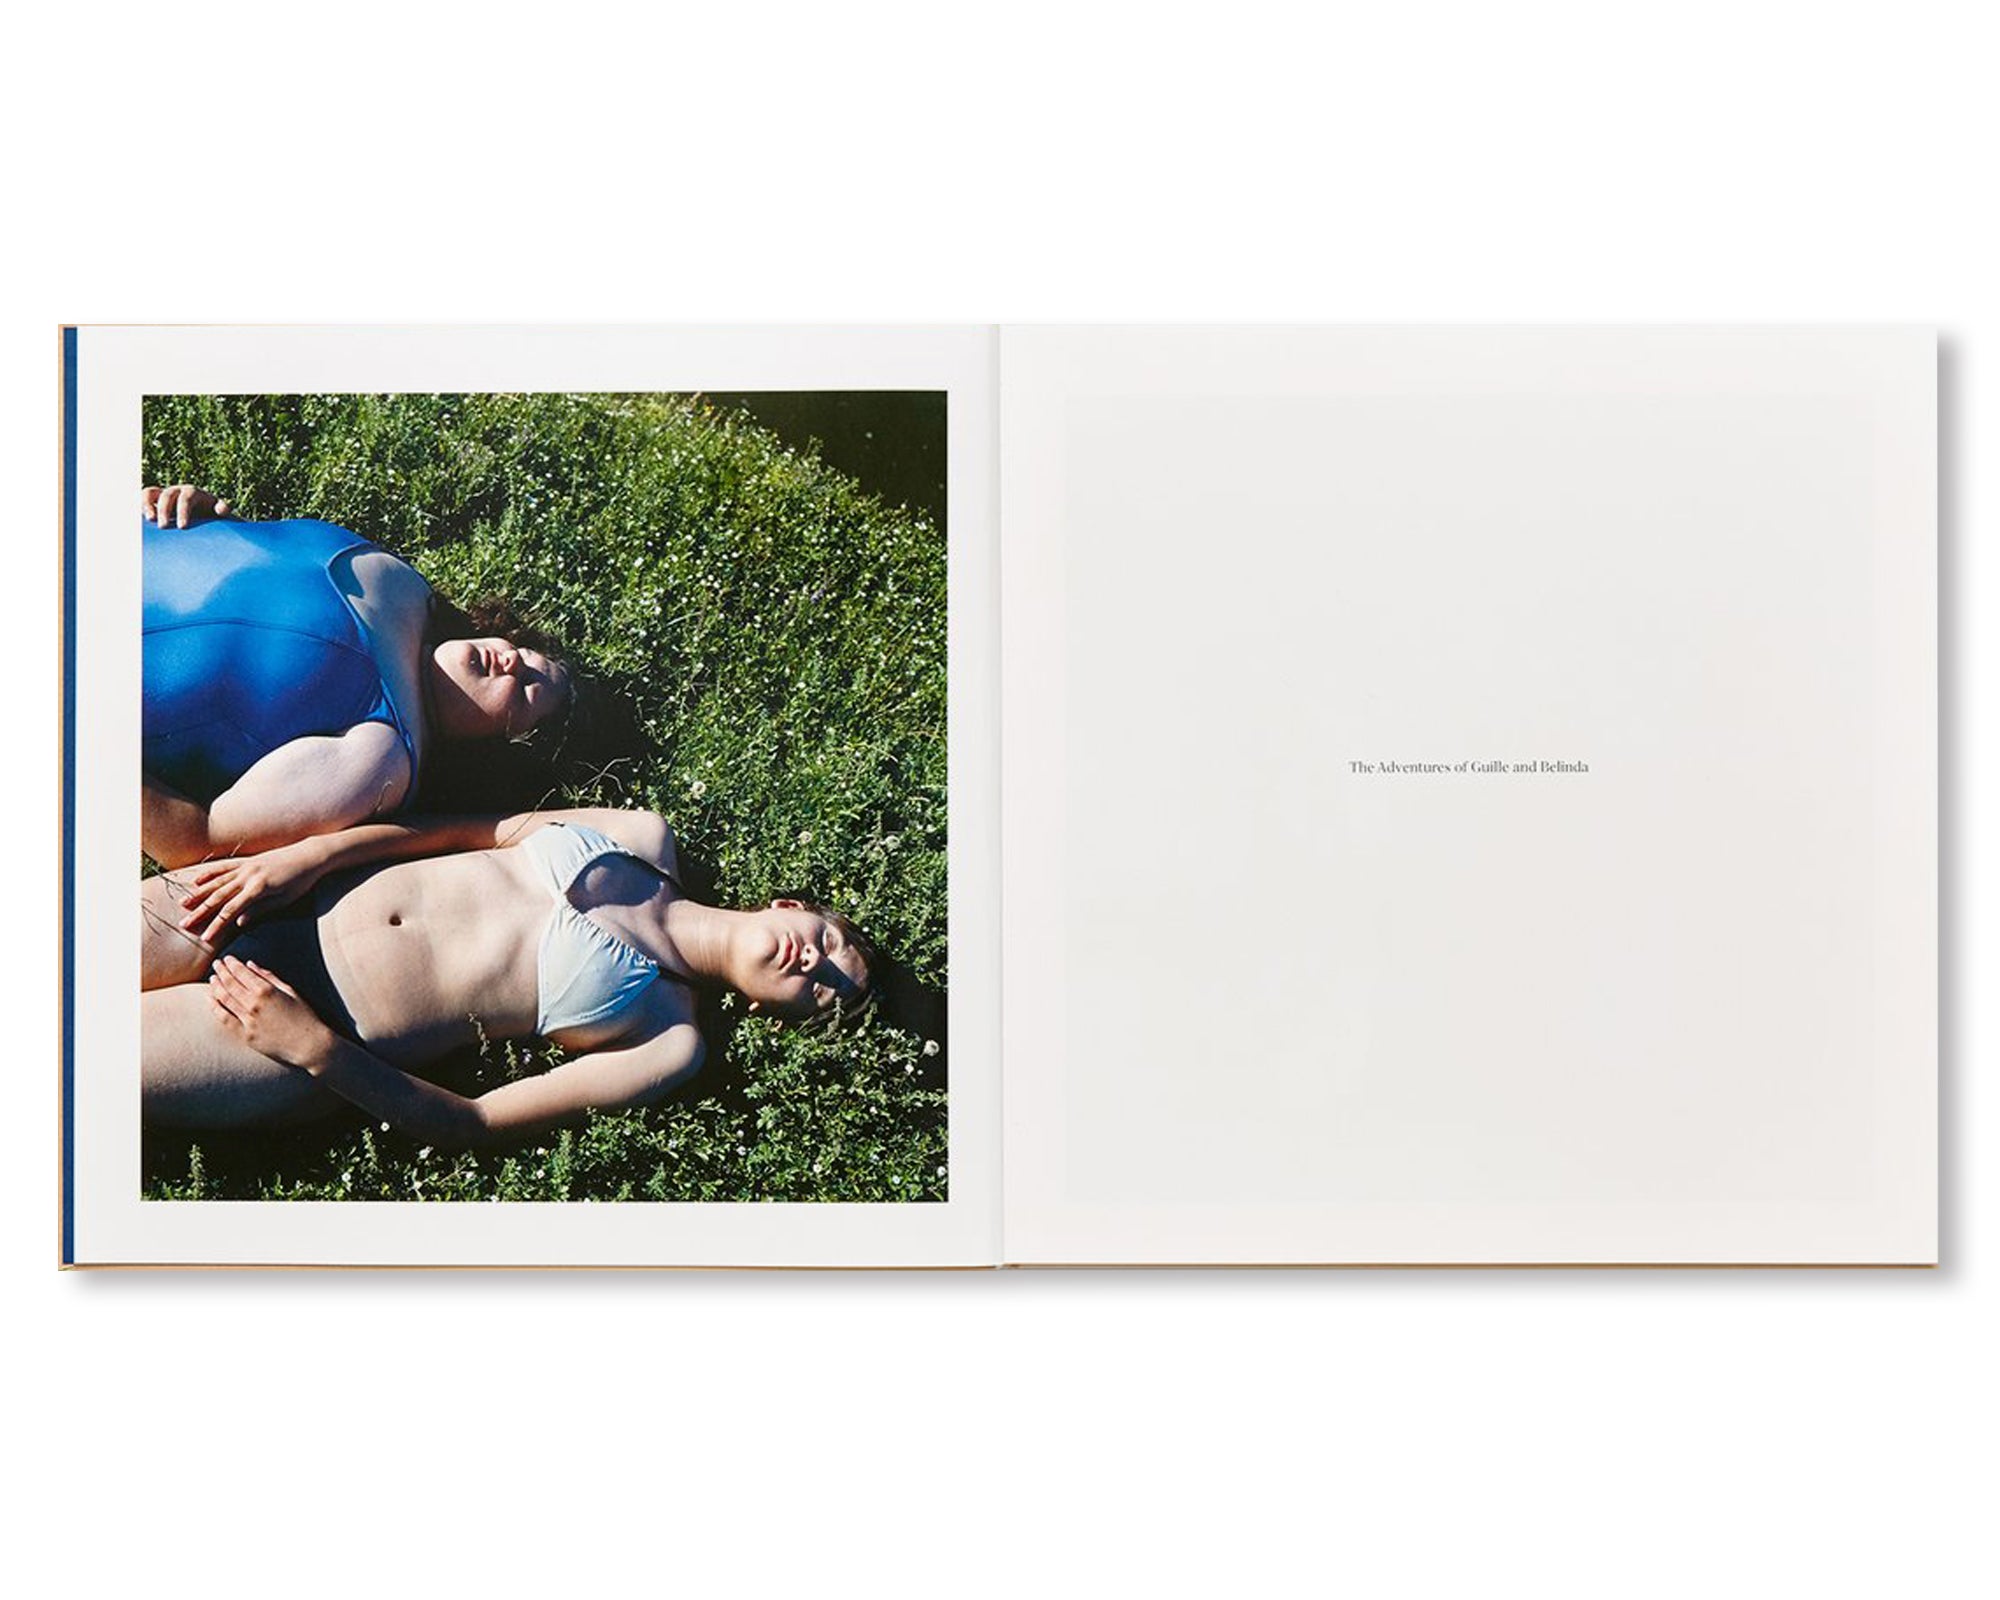 THE ADVENTURES OF GUILLE AND BELINDA AND THE ILLUSION OF AN EVERLASTING SUMMER by Alessandra Sanguinetti [SIGNED PLATE]